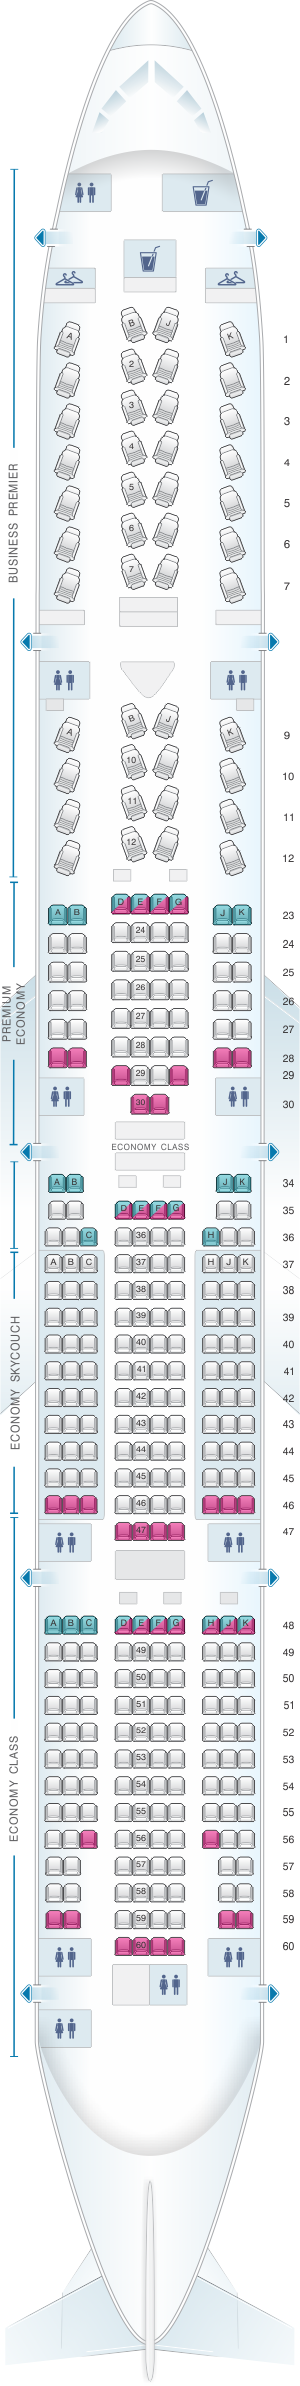 Seat map for Air New Zealand Boeing B777 300ER